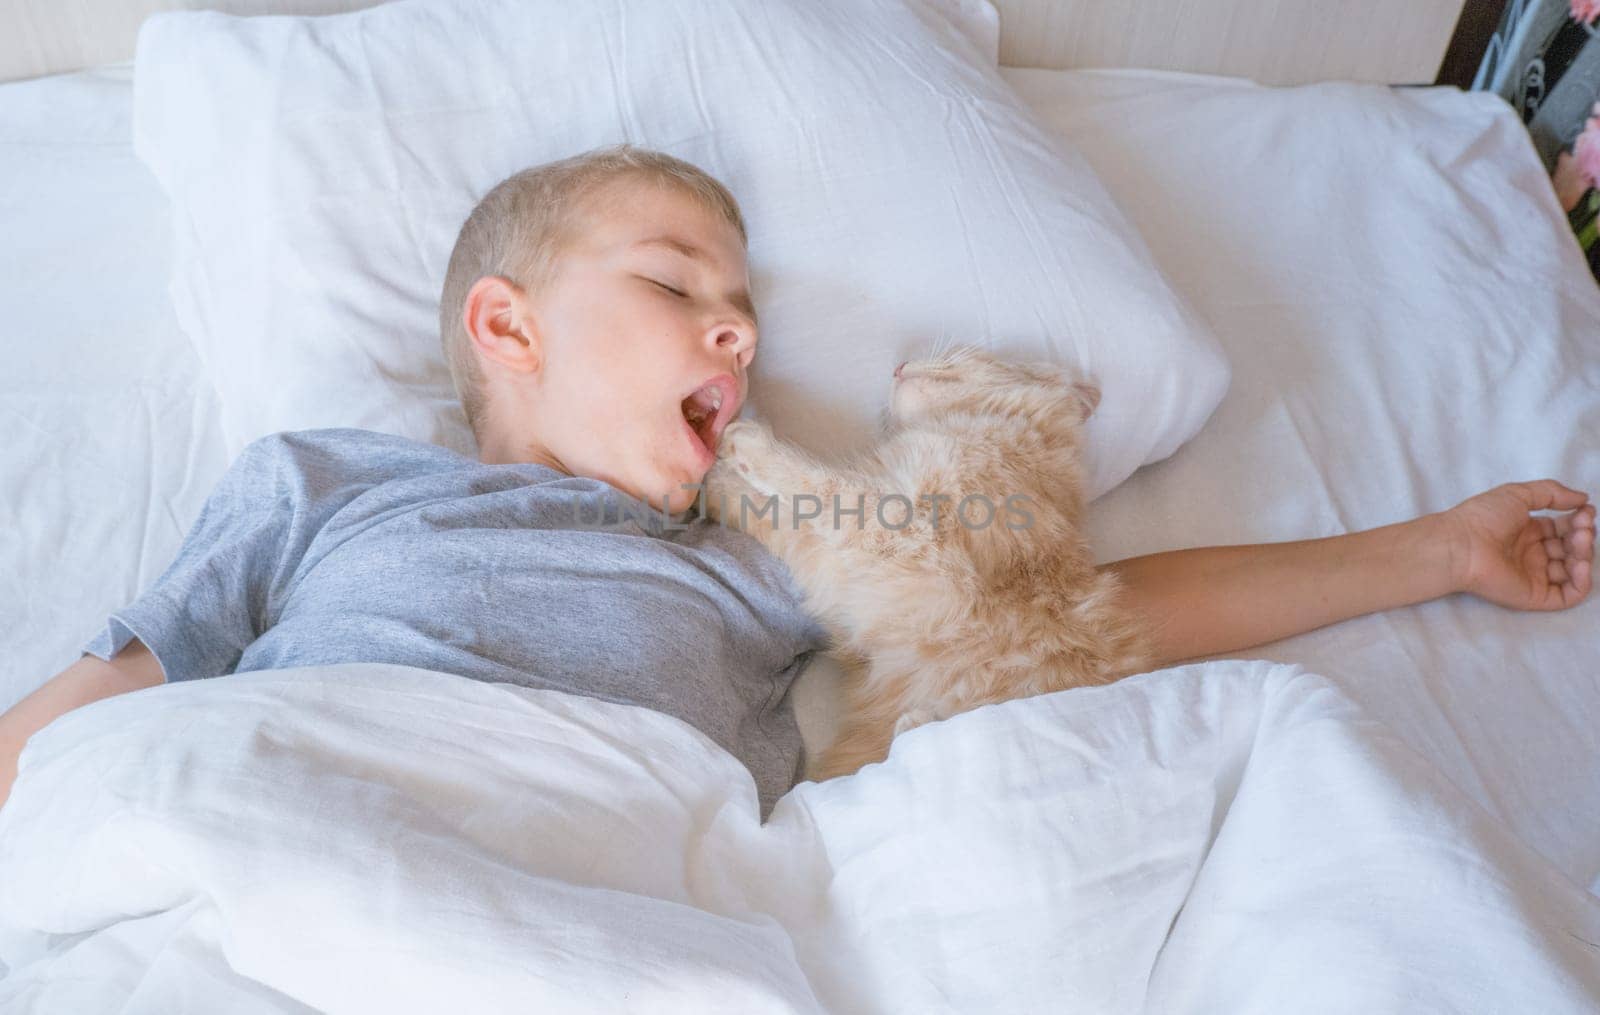 the boy falls asleep and hugs his ginger cat, who sleeps with him under the covers. children and pets. the cat sleeps with the baby. the child is getting ready for bed